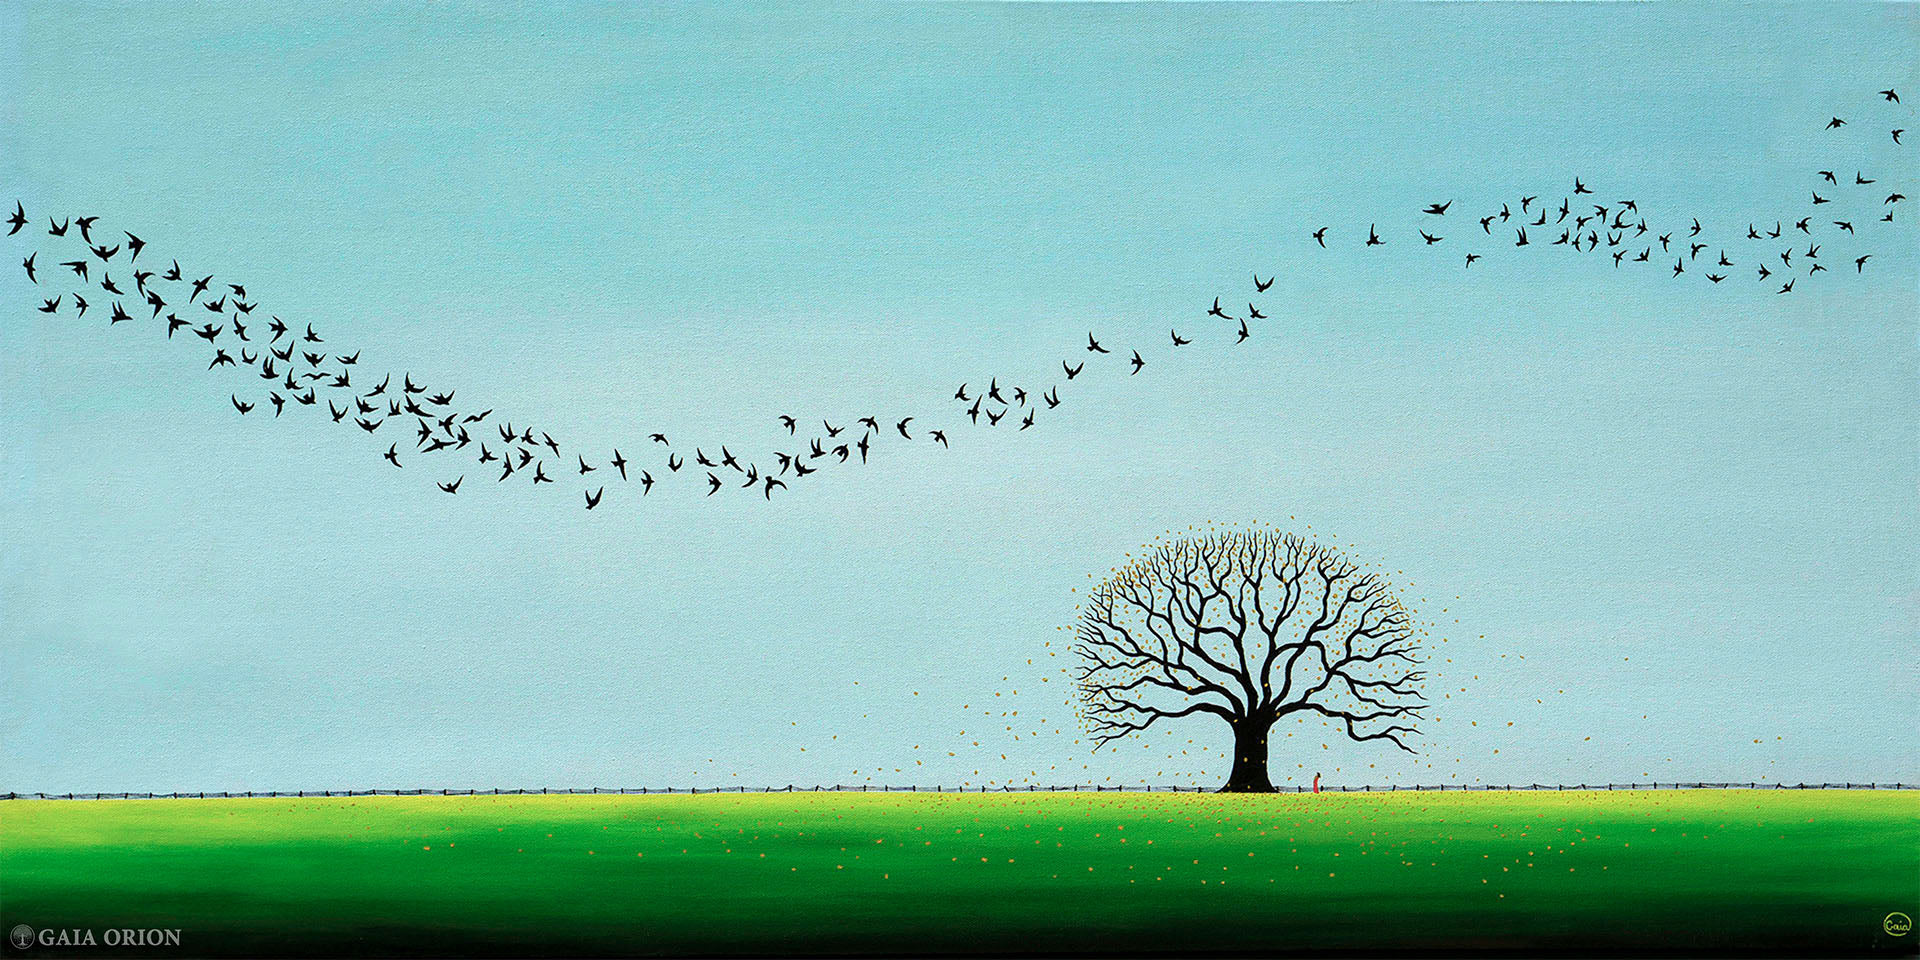 A peaceful landscape painting of birds flying and an autumn tree with falling leaves